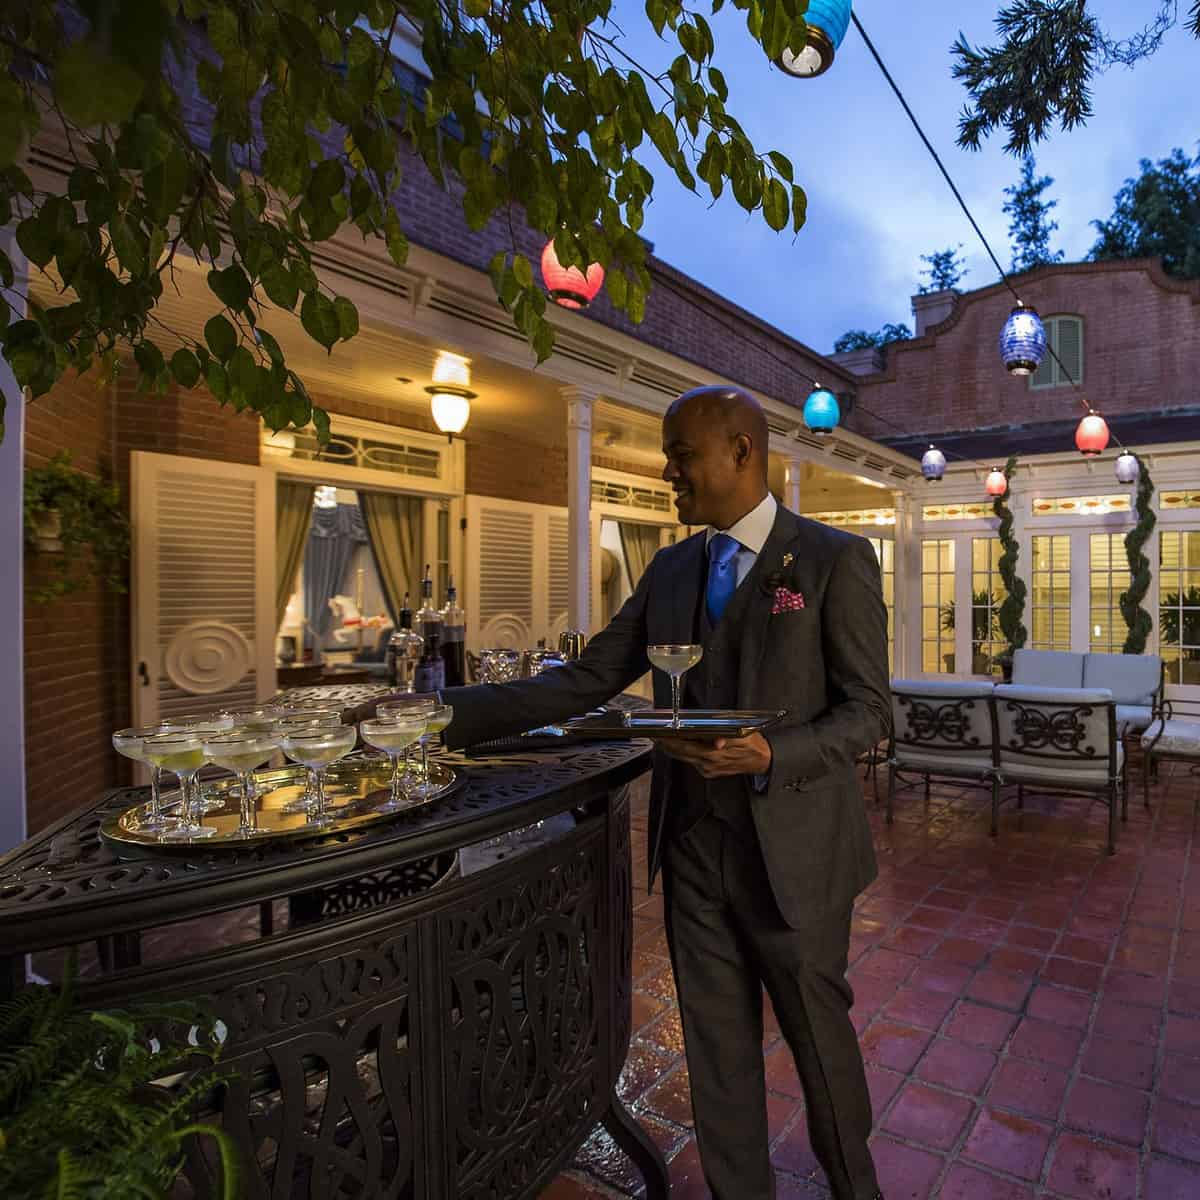 Legendary Disney service is on display from the moment guests are welcomed by the 21 Royal staff. Signature cocktails are served by professional butlers in the courtyard, then everyone is invited out to the patio for a casual reception.